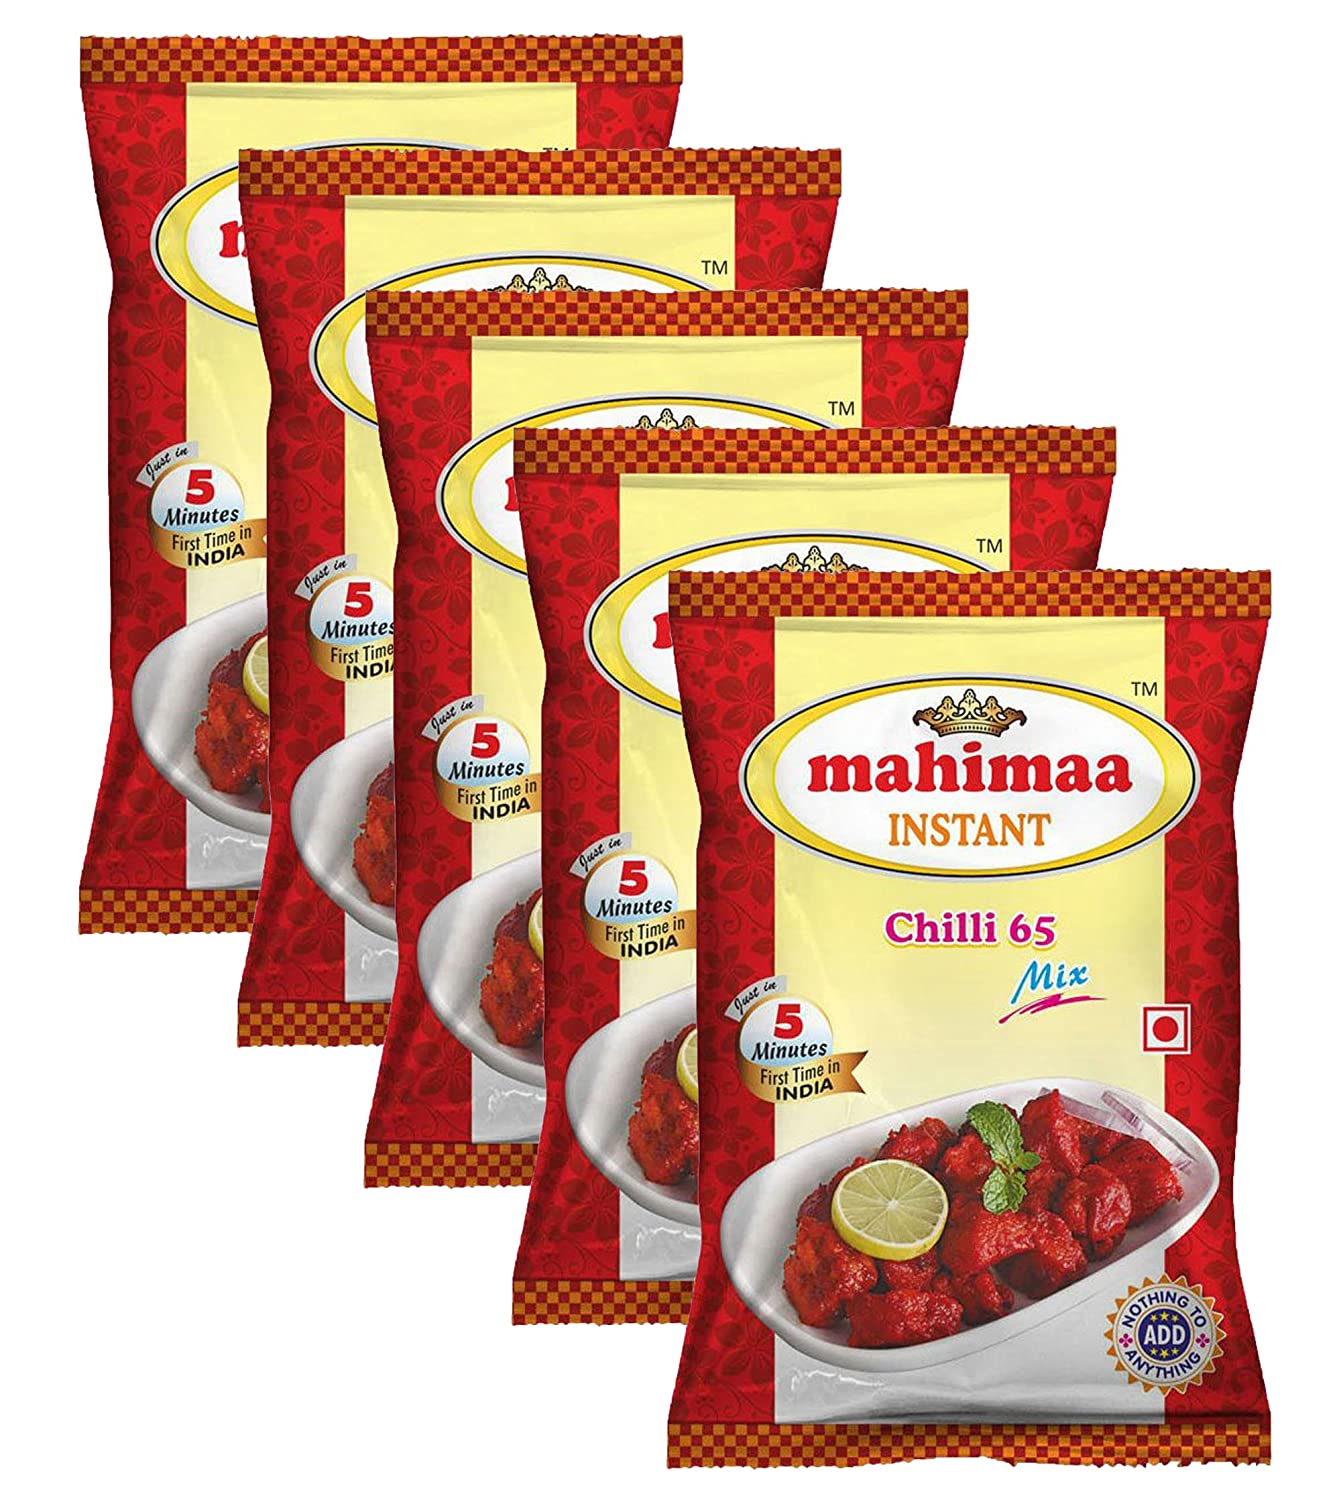 Mahimaa Instant Chilli 65 Mix, Size- 50G, Pack Of 5